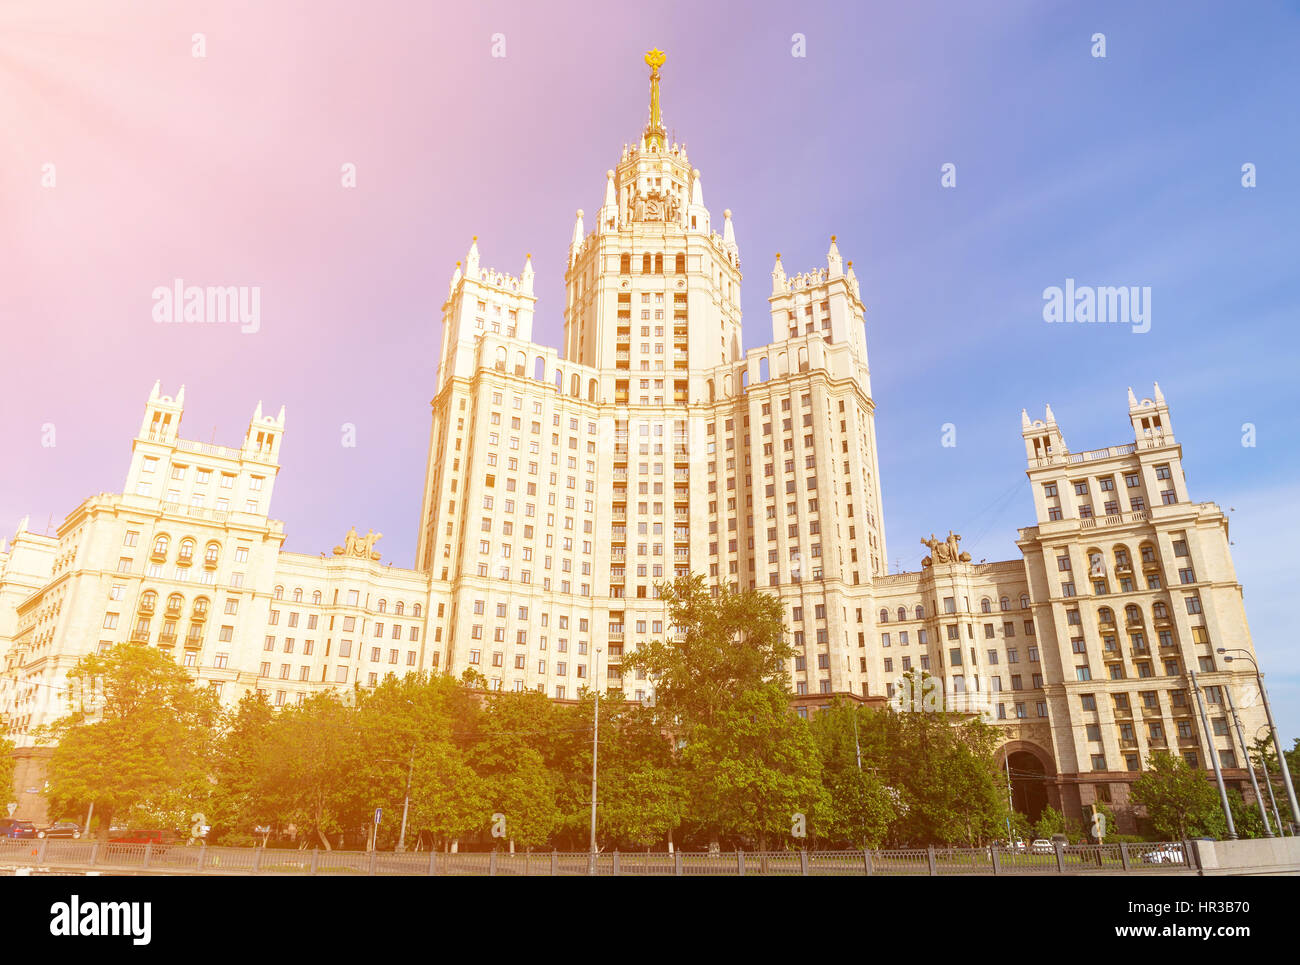 The front facade view of the Kotelnicheskaya skyscraper in Moscow, Russia Stock Photo